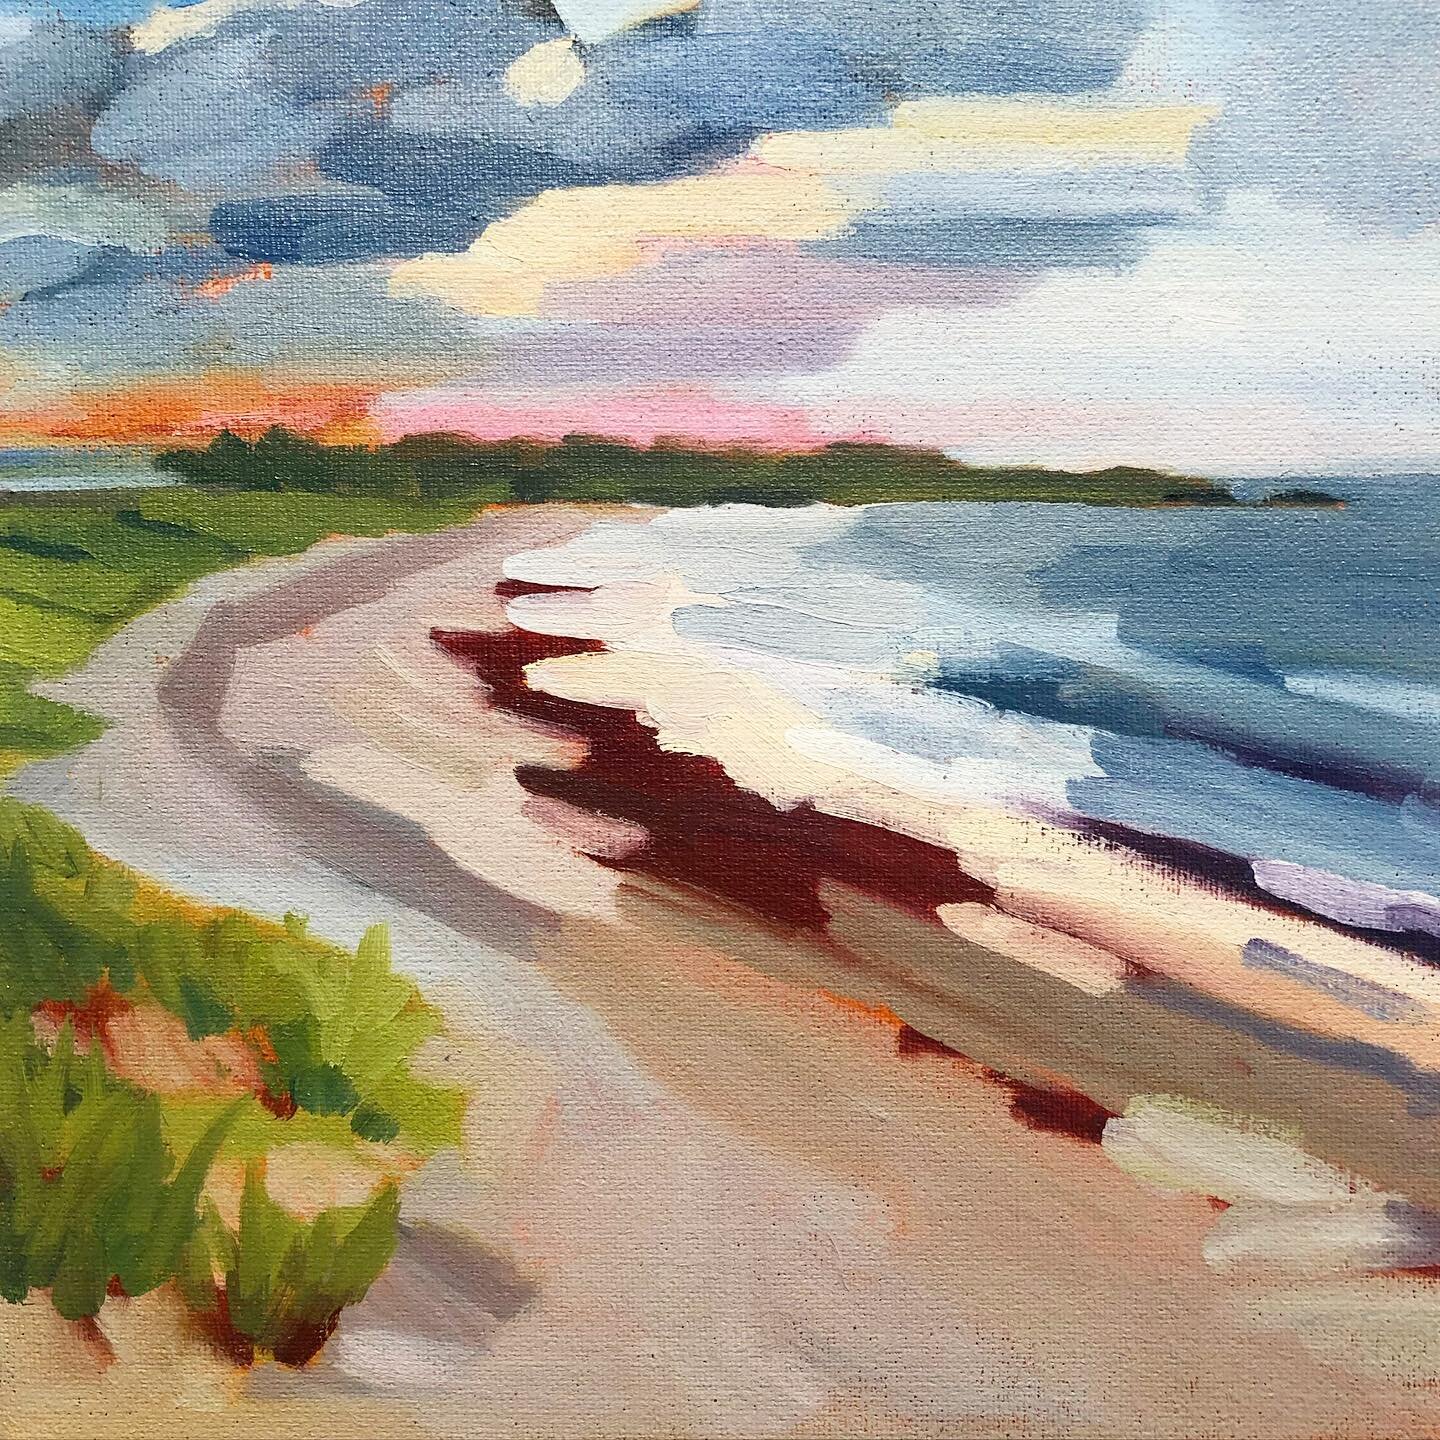 Jill Madden &ldquo;Red Tide&rdquo; oil/linen 12&rdquo; x 12&rdquo; (2021) Sun, sand, seaweed and surf&hellip; all part of summer on the coast! DM inquiries #redtide #jillmadden #robdiebboll #placeswelove #seascapes #squarepainting #paintings #beaches